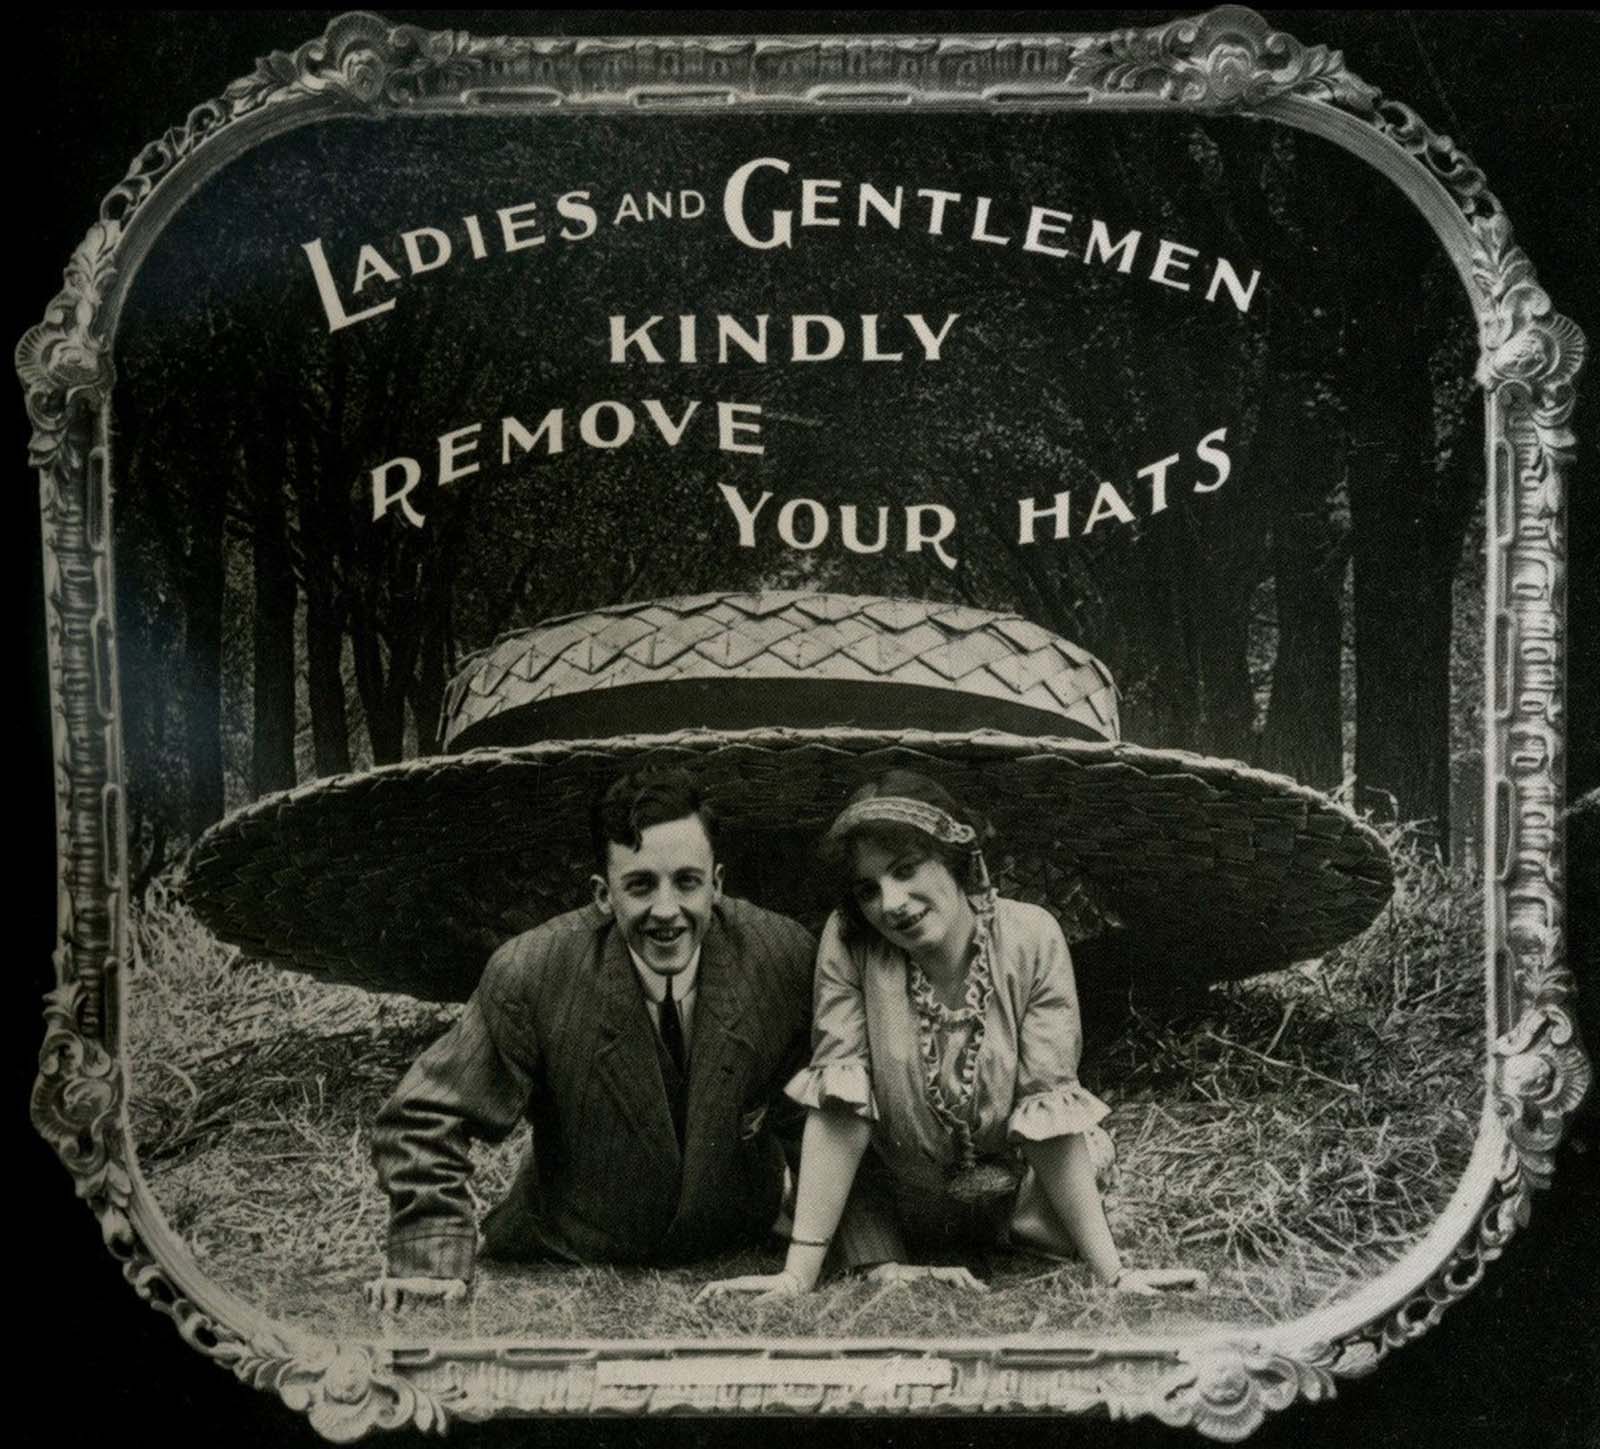 Both men and women were reminded to remove their hats so people who sat behind them would be able to watch the film with clear sight.